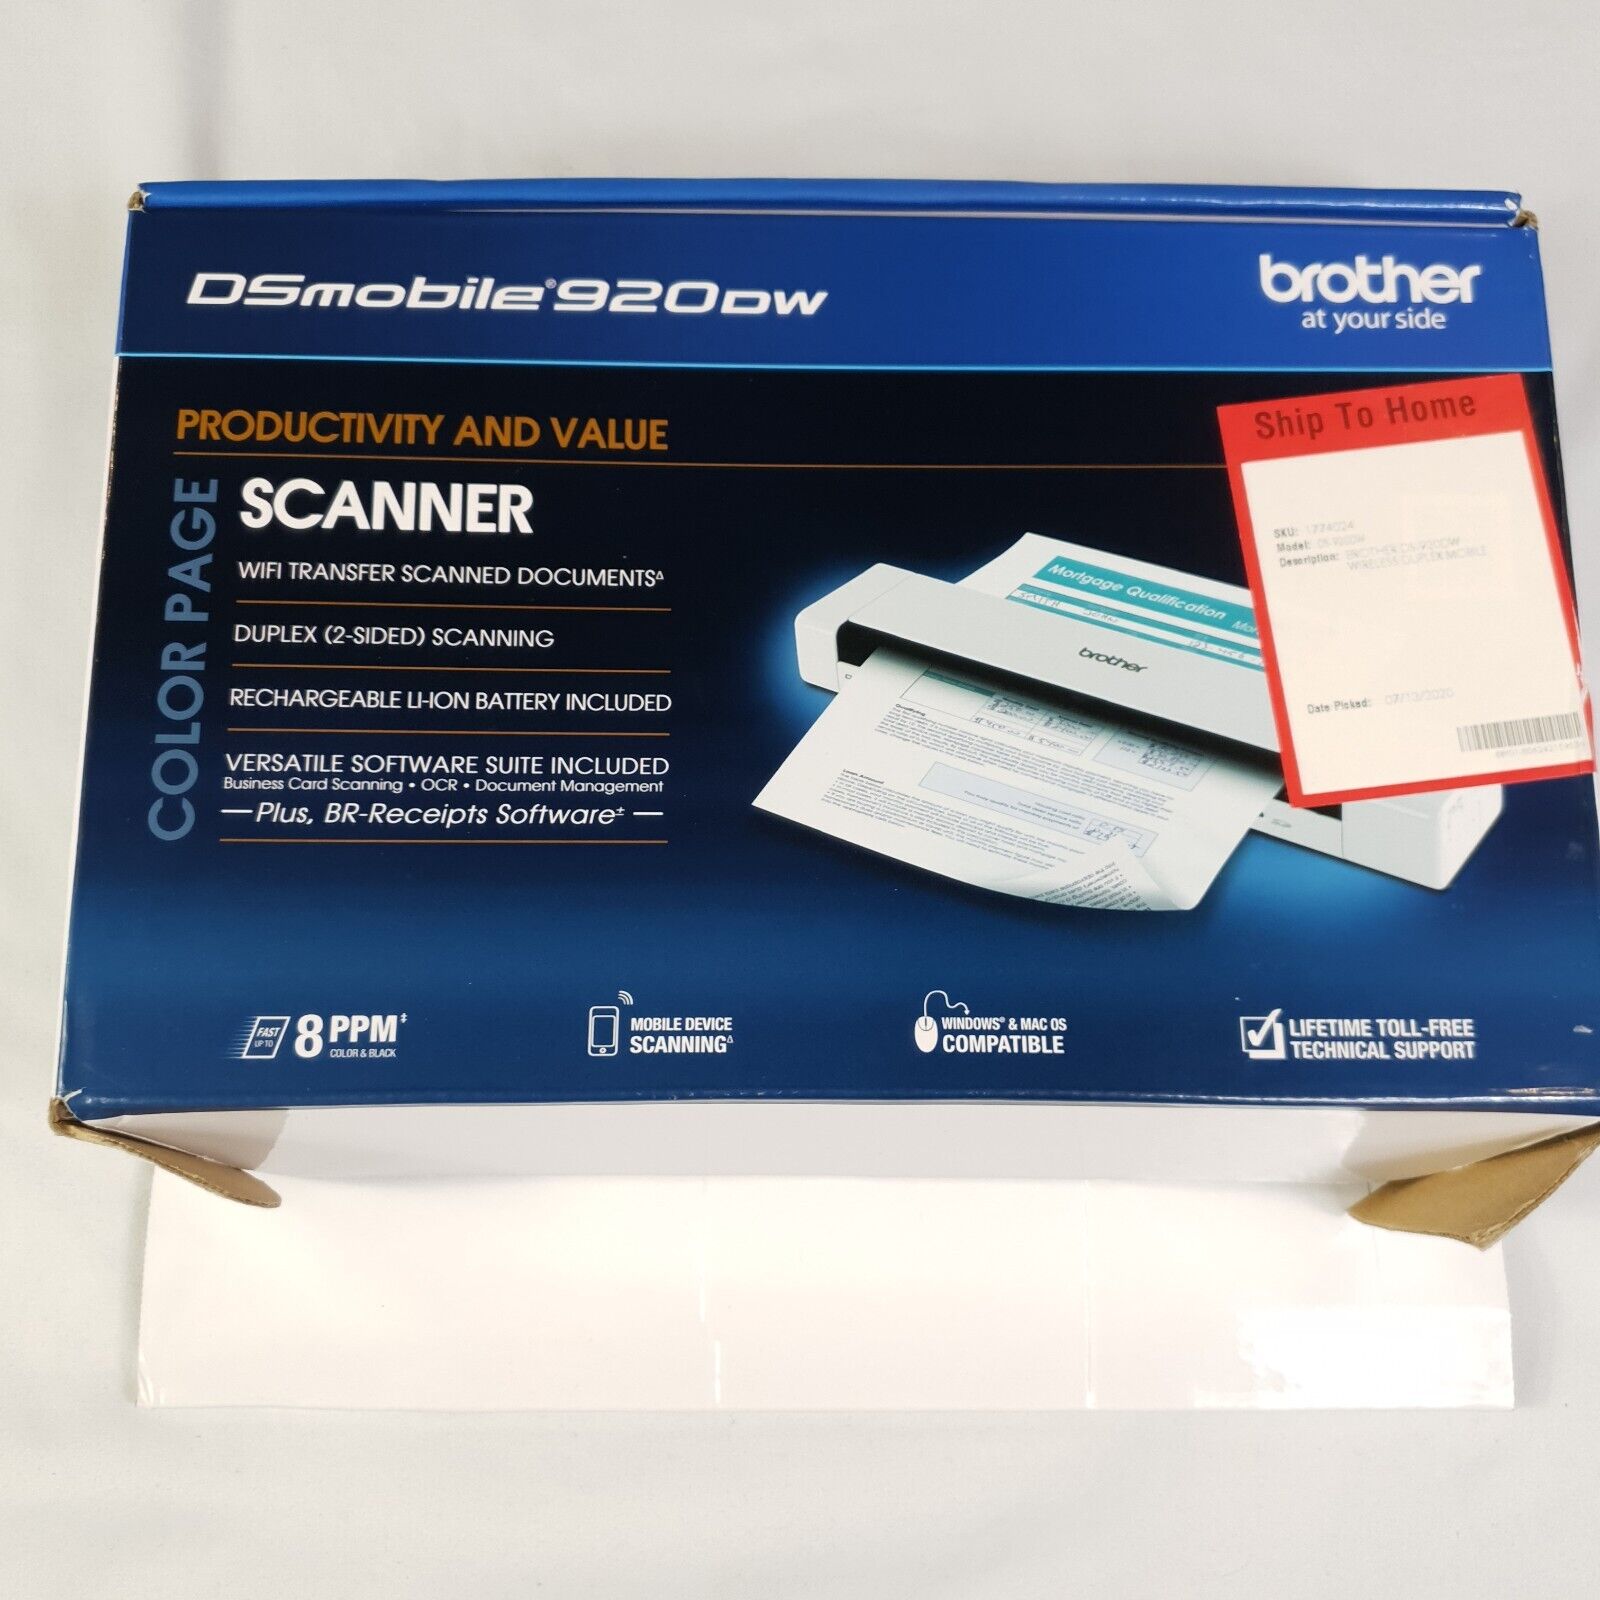 Brother DS-920DW Wireless Duplex Mobile Color Page Scanner - White 